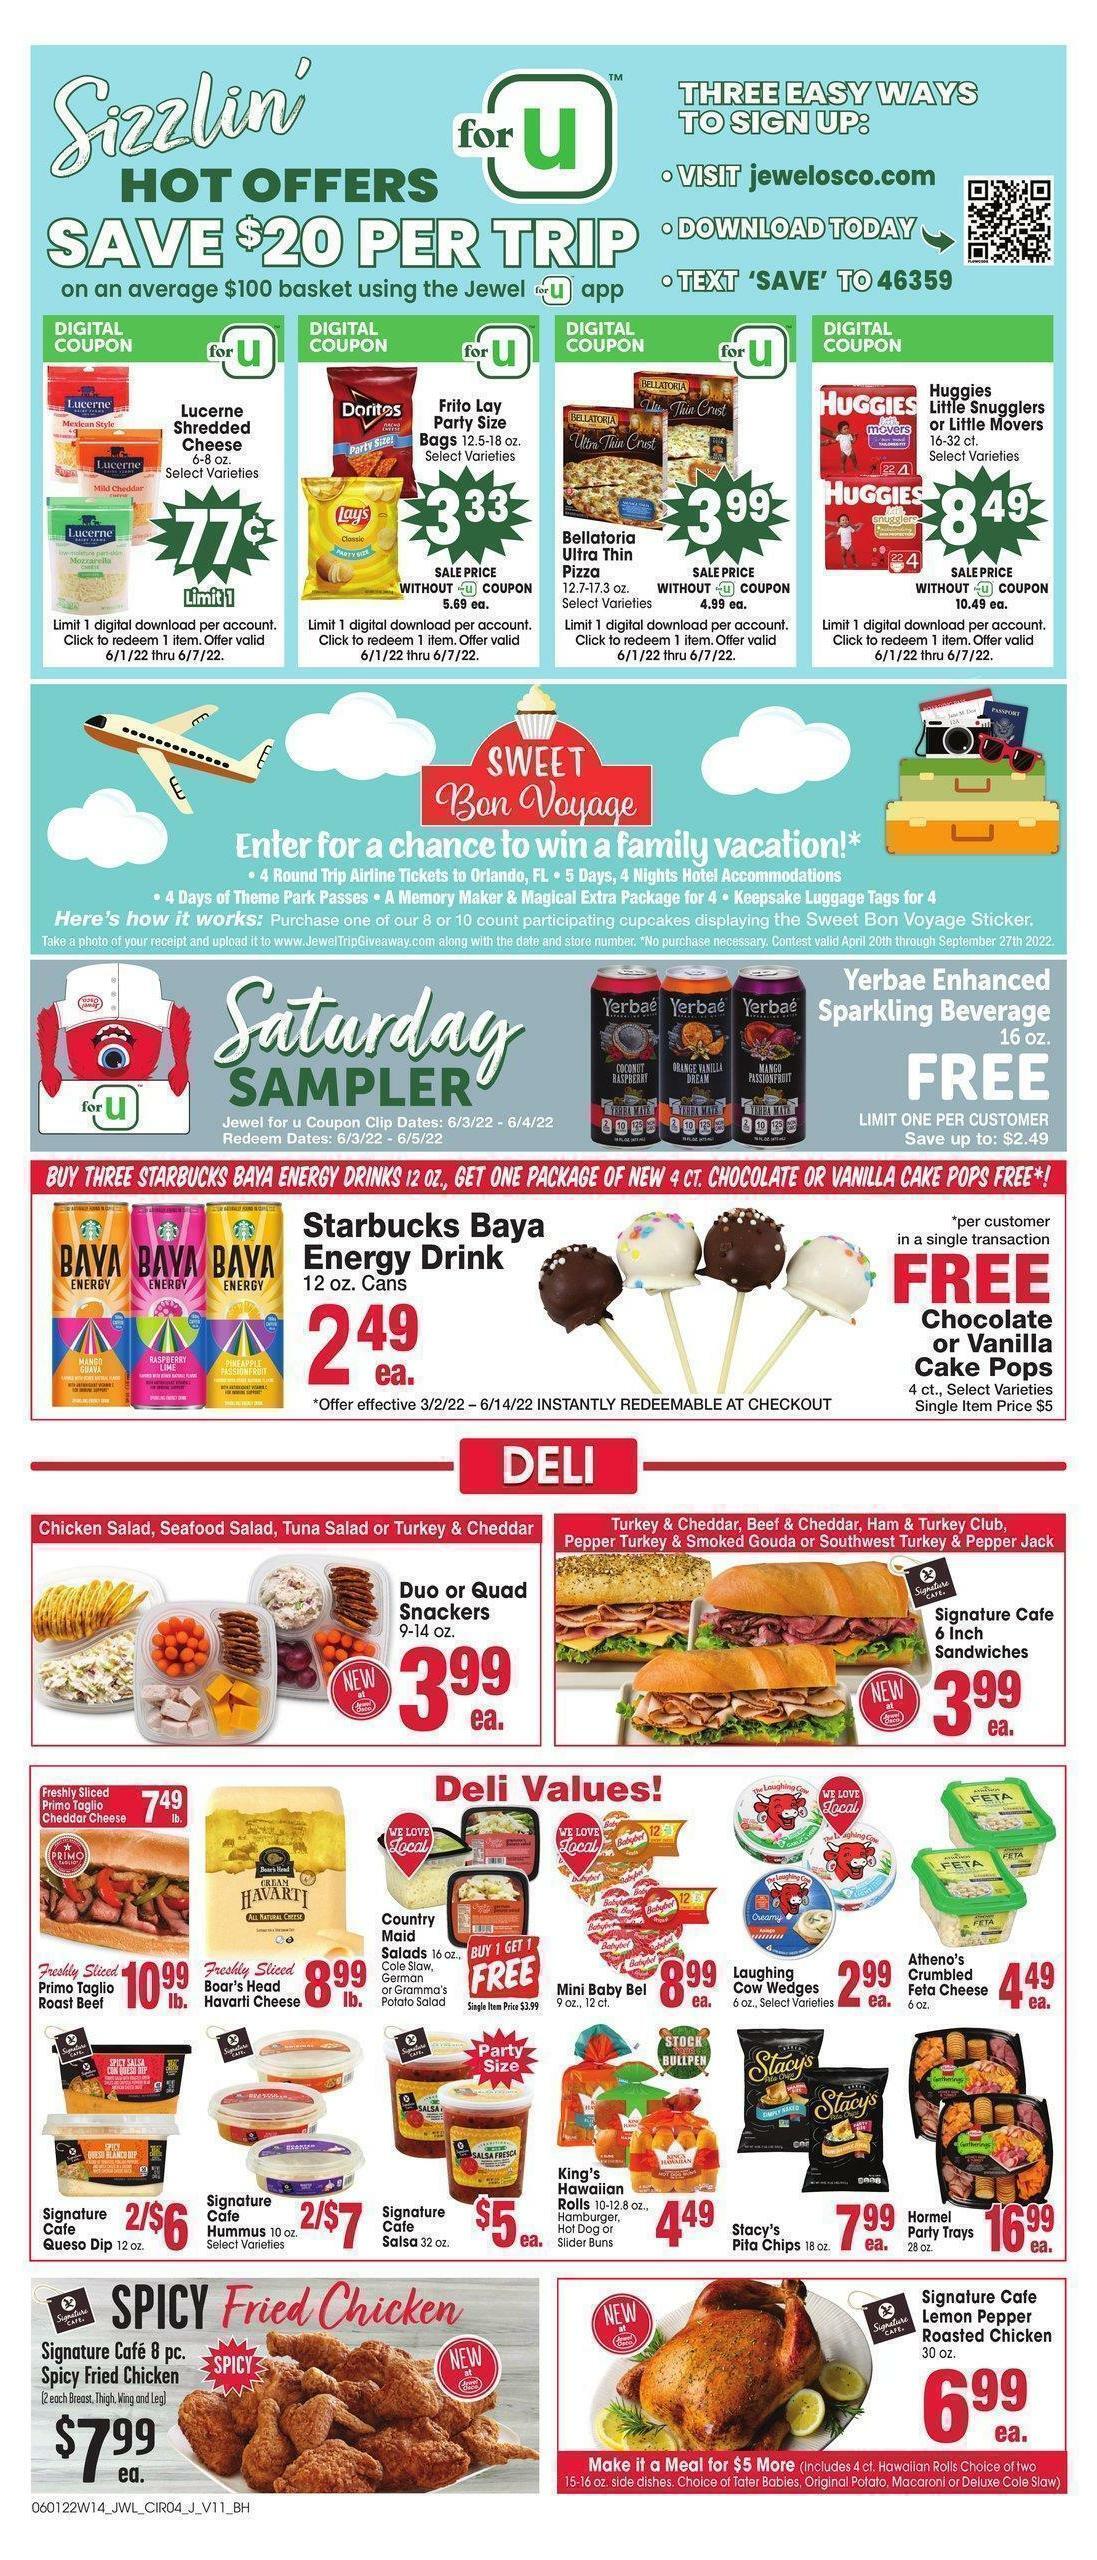 Jewel Osco Weekly Ad from June 1